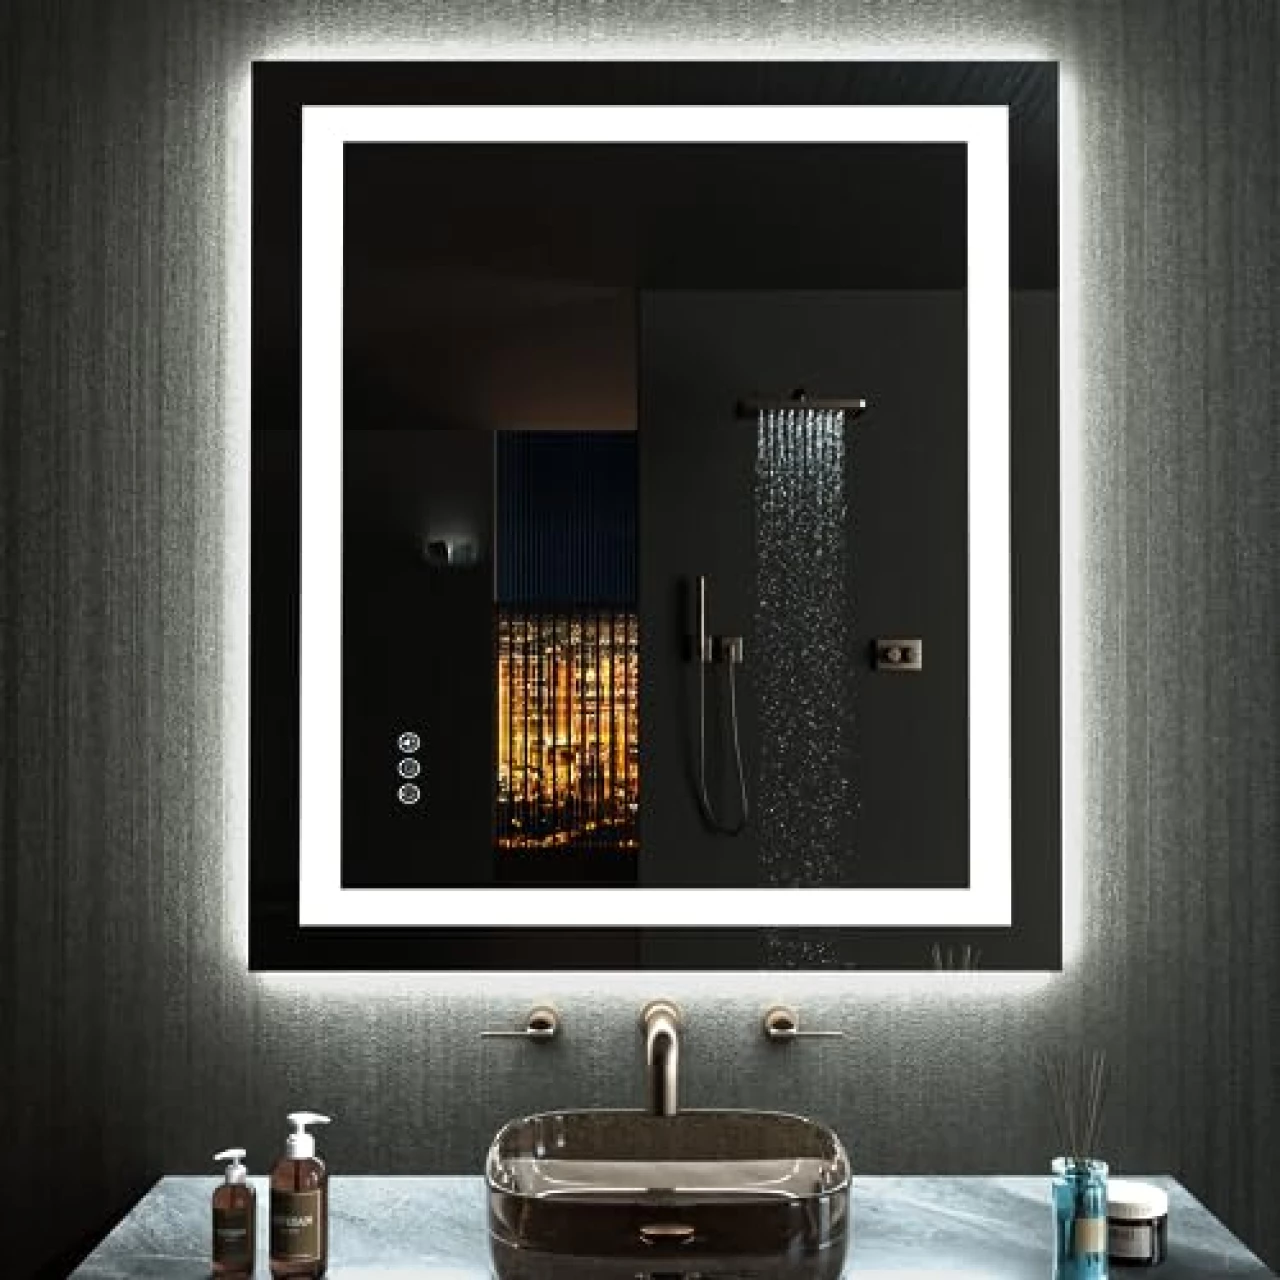 LOAAO 20&quot;X28&quot; LED Bathroom Mirror with Lights, Anti-Fog, Dimmable, RGB Backlit + Front Lighted, Bathroom Vanity Mirror for Wall, Memory Function, Waterproof, Tempered Glass